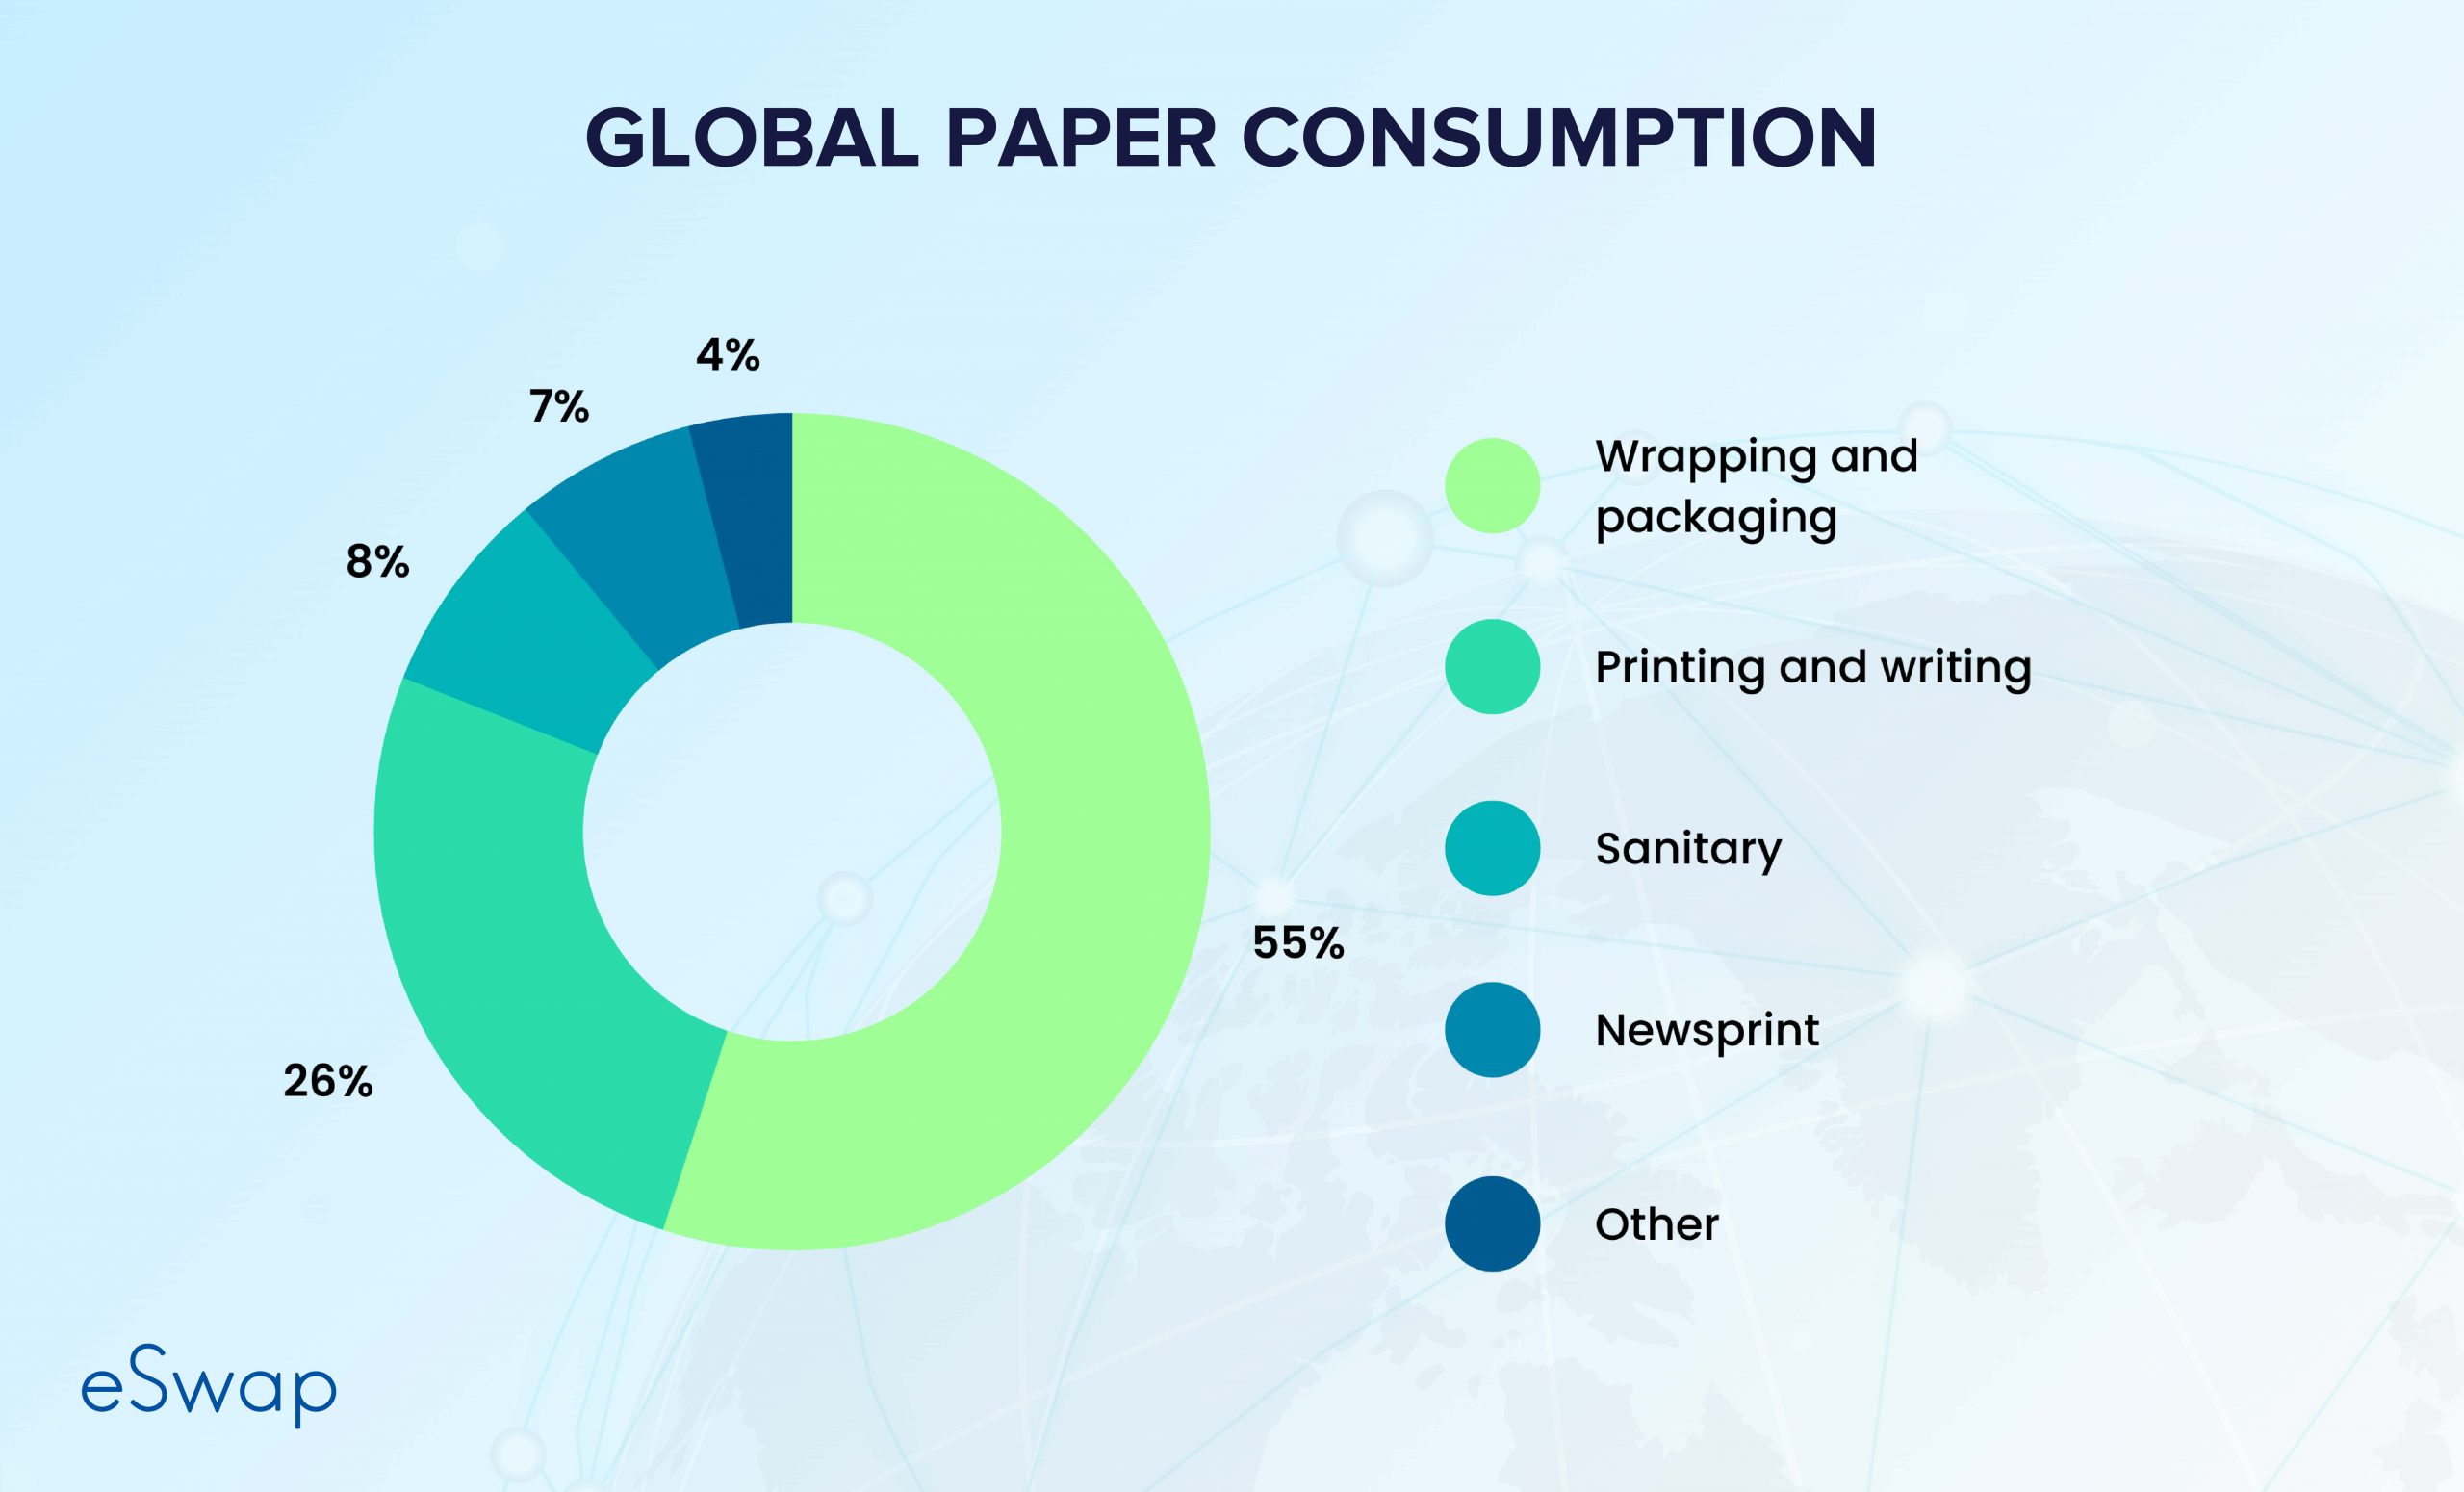 Global paper consumption statistics by category